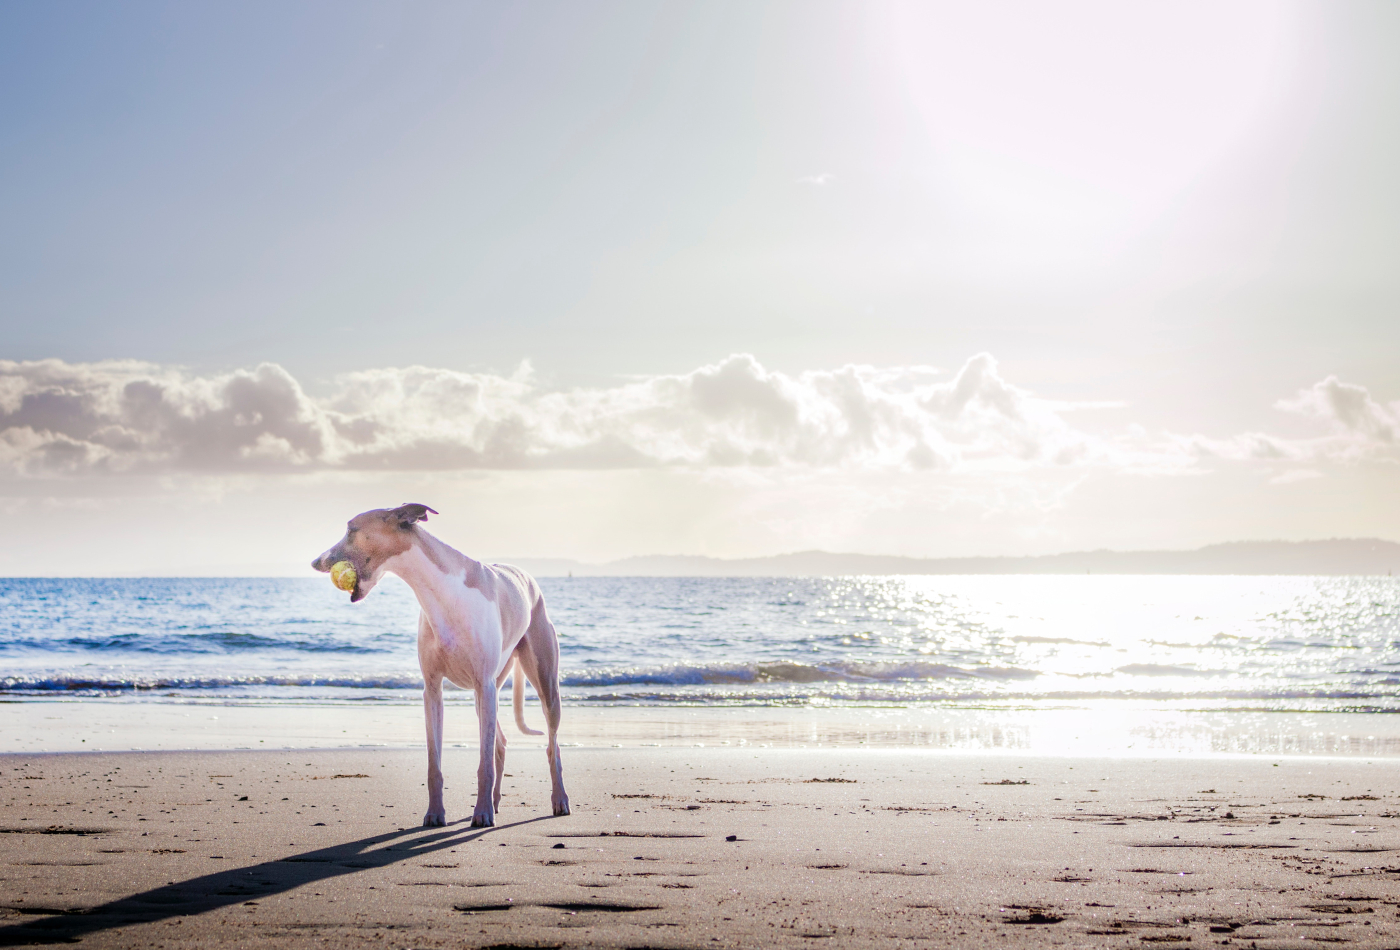 A dog stood on a sunny beach with the sea in the background holding a hall in its mouth